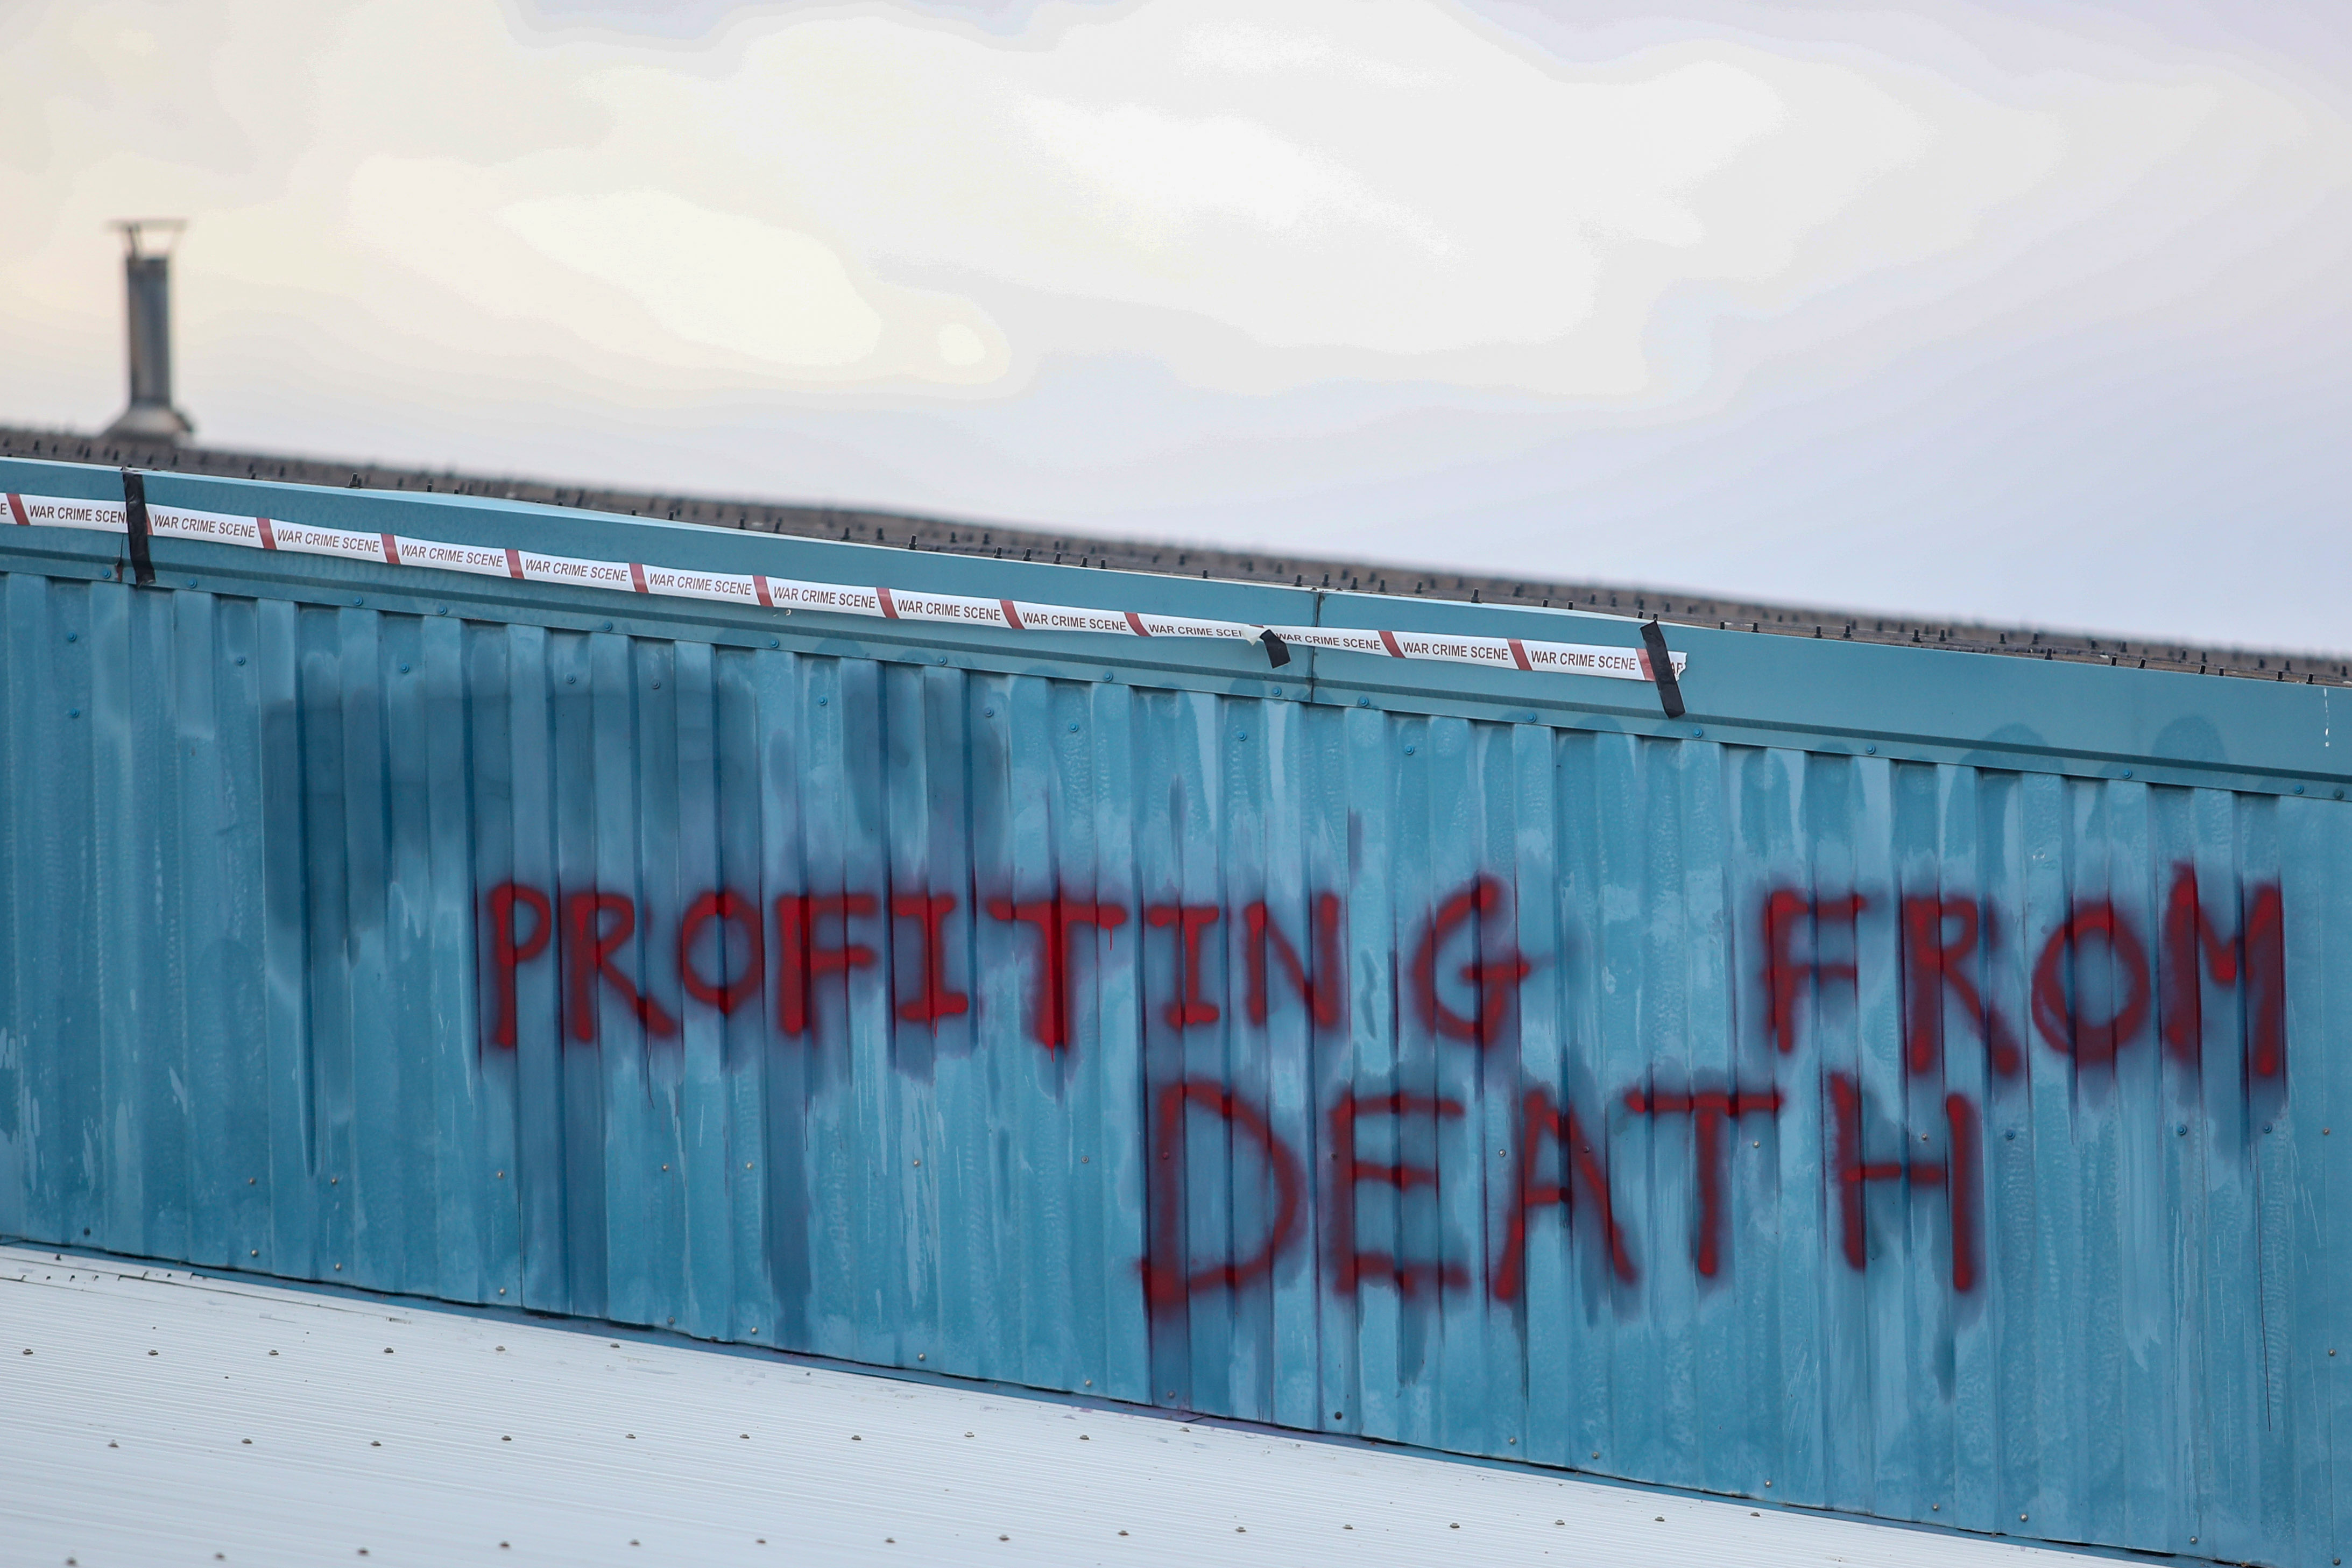 The front of the factory was spray-painted with the words "profiting from death"